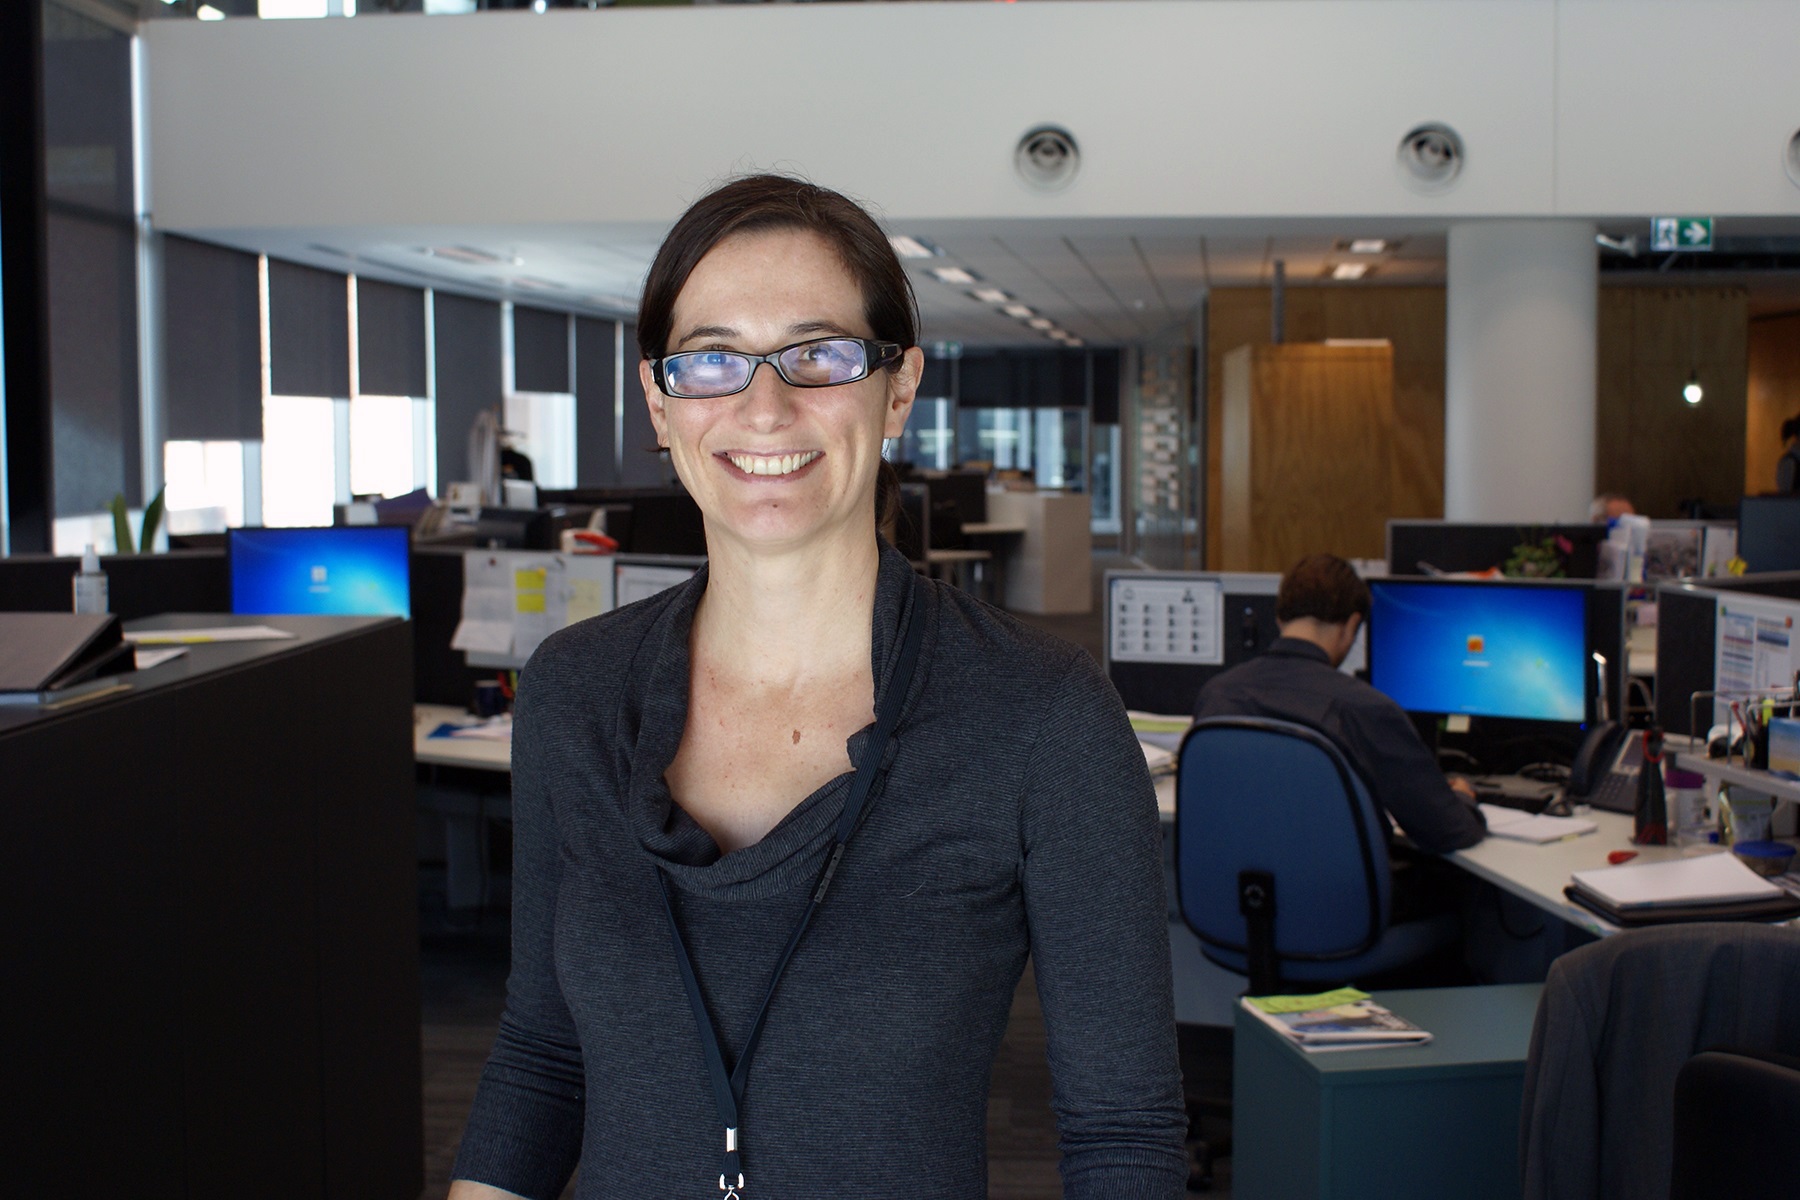 Photo of SBDC Advisory Services Manager Lisa Legena standing in the SBDC office in Perth, Western Australia.